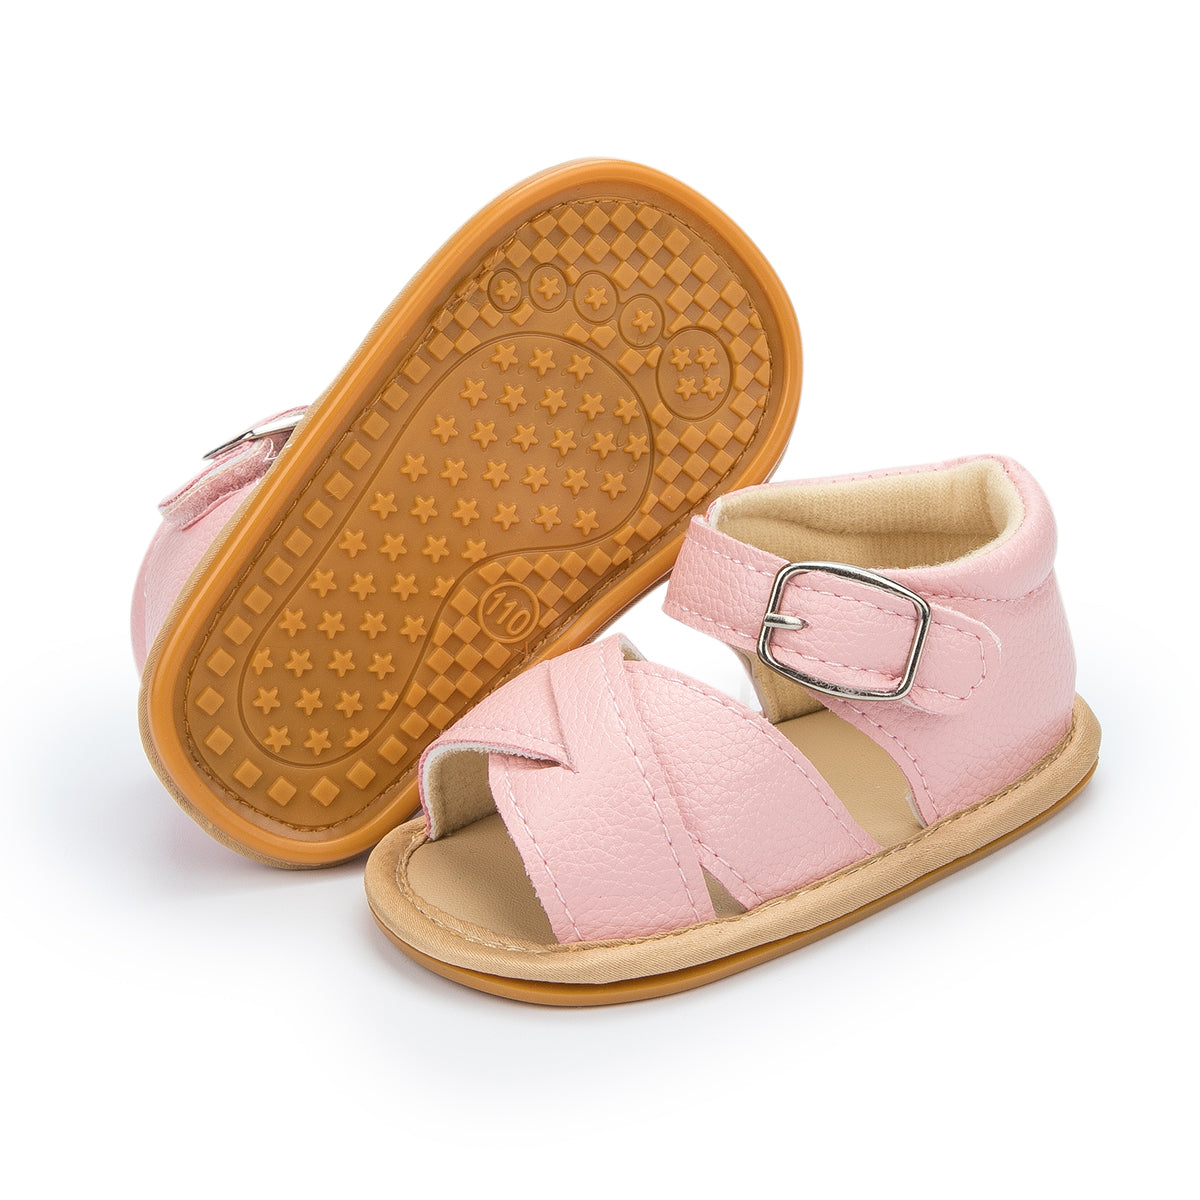 Buy Cute Walk by Babyhug Sandals with Velcro Closure Pink for Girls  (1-1Years) Online, Shop at FirstCry.com - 11565191